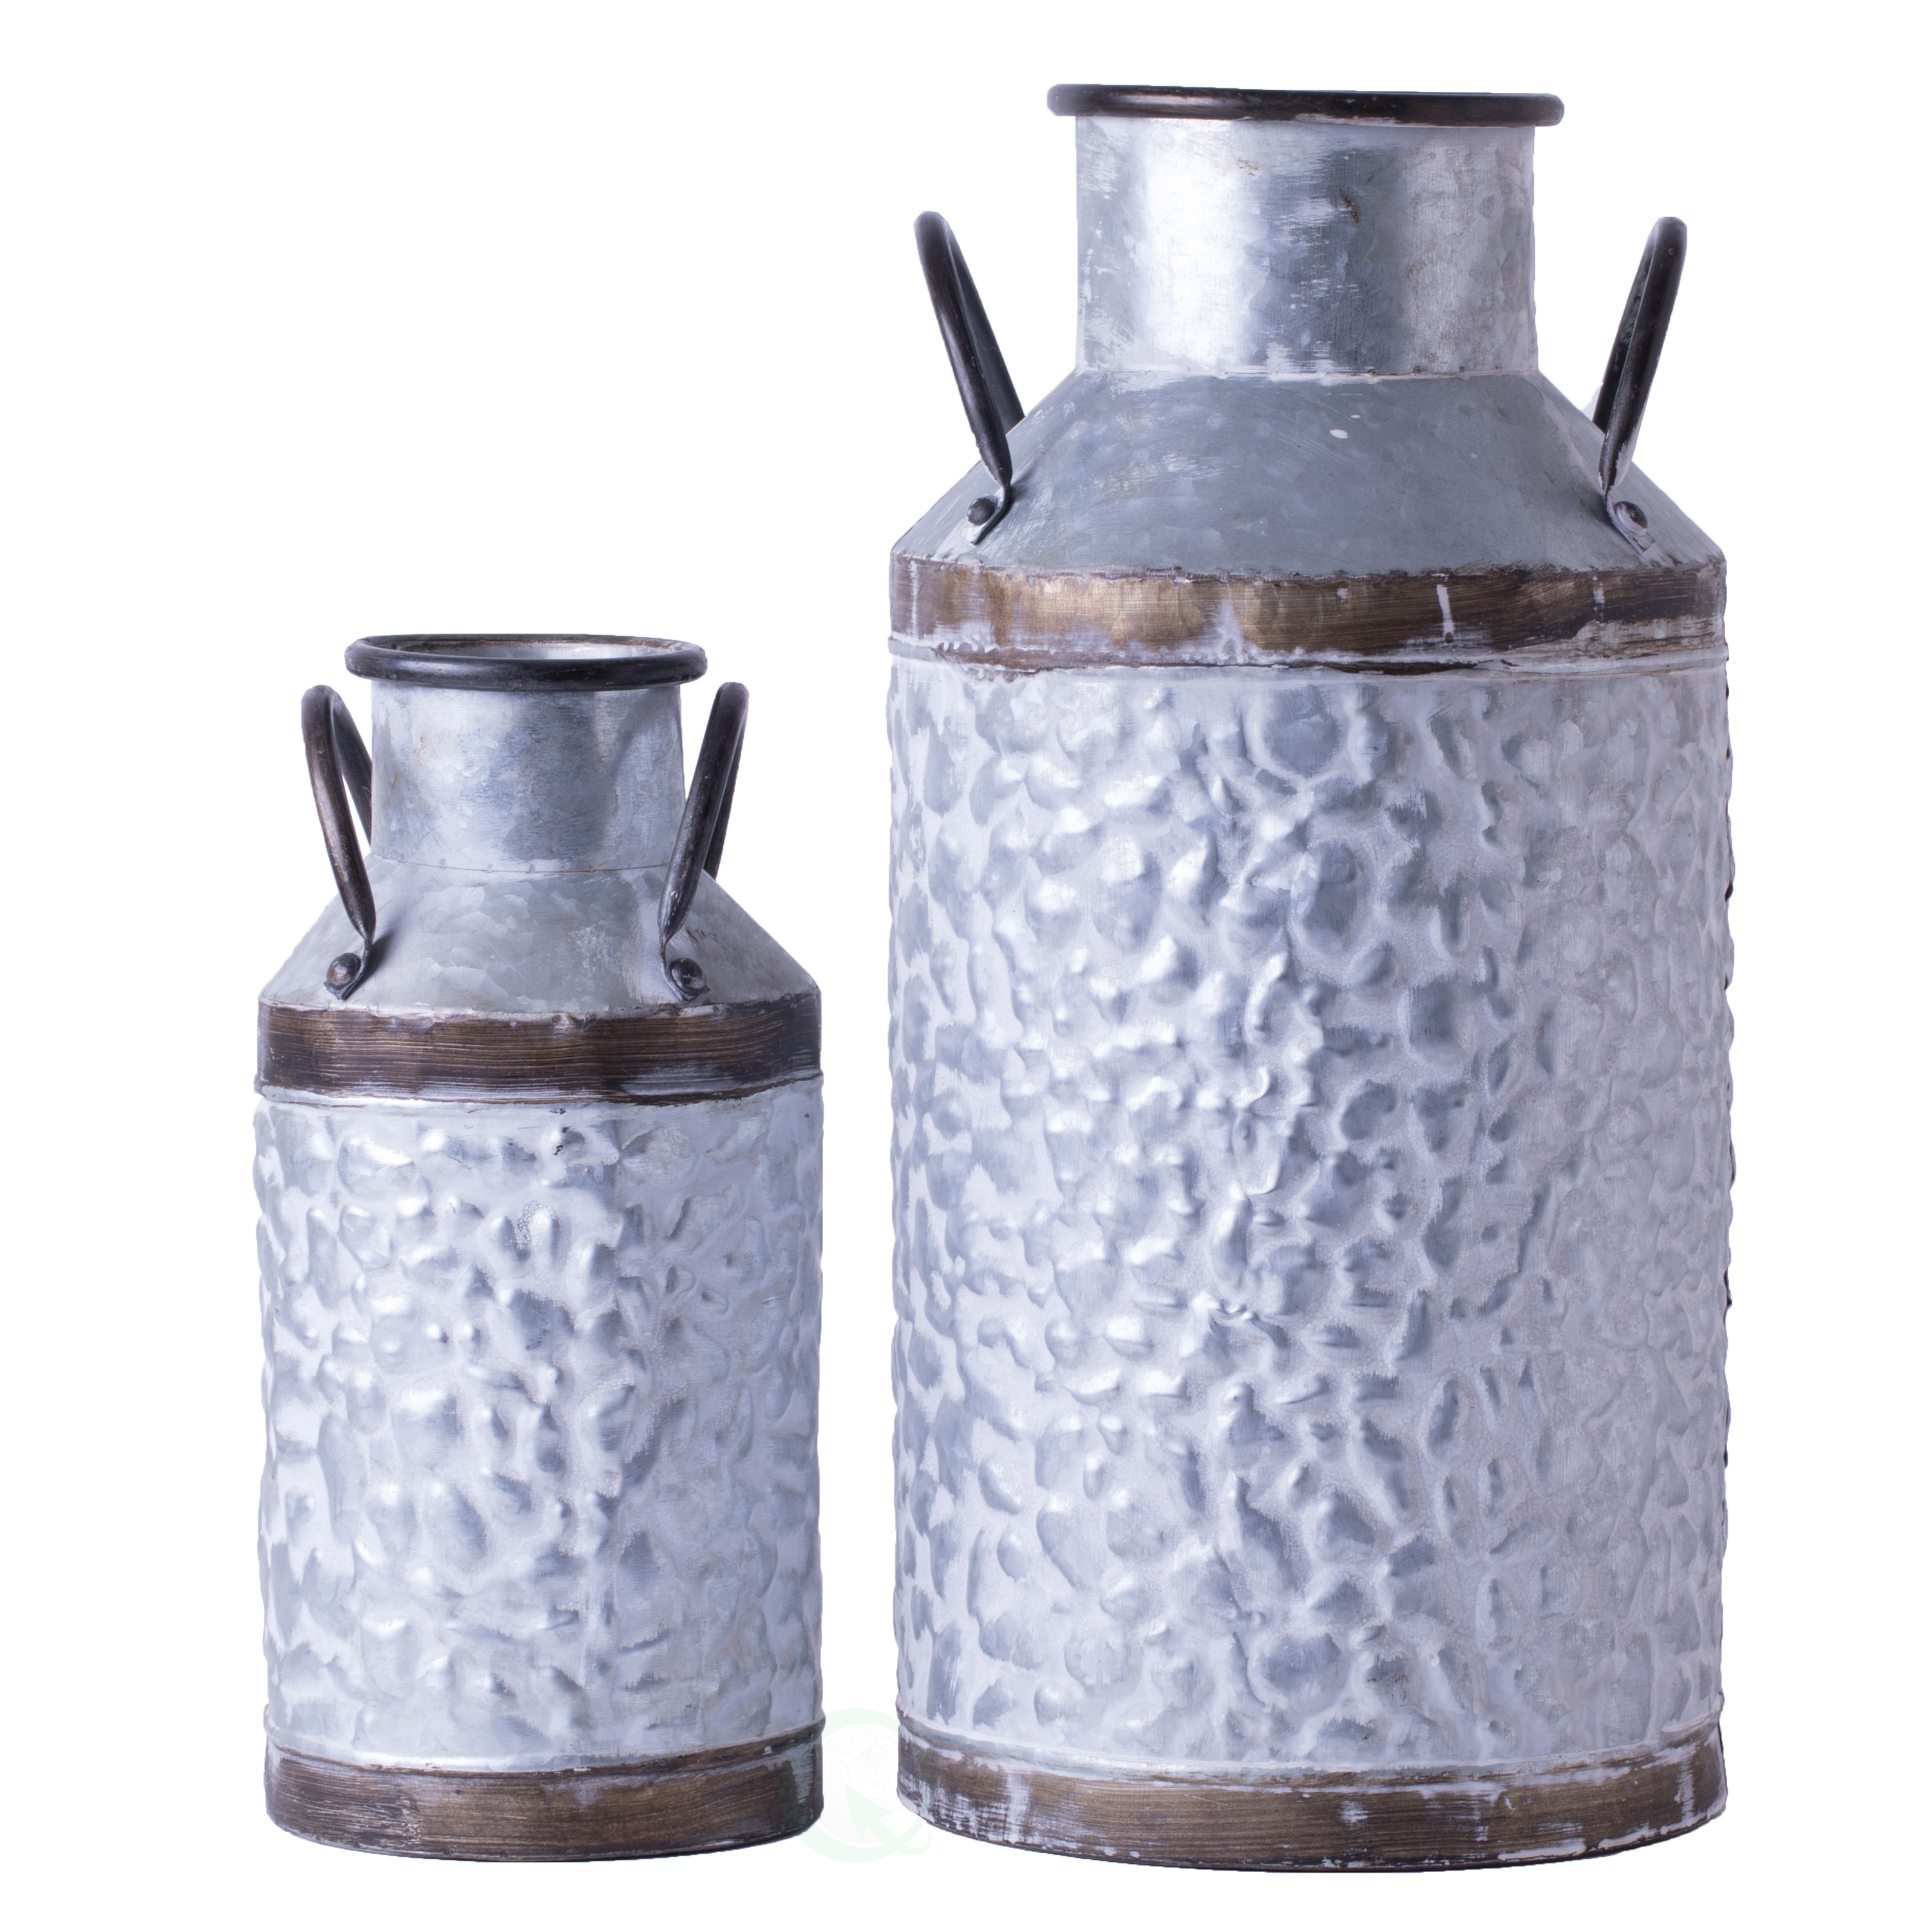 Rustic Farmhouse Style Galvanized Metal Milk Can Decoration Planter And Vase, - Large